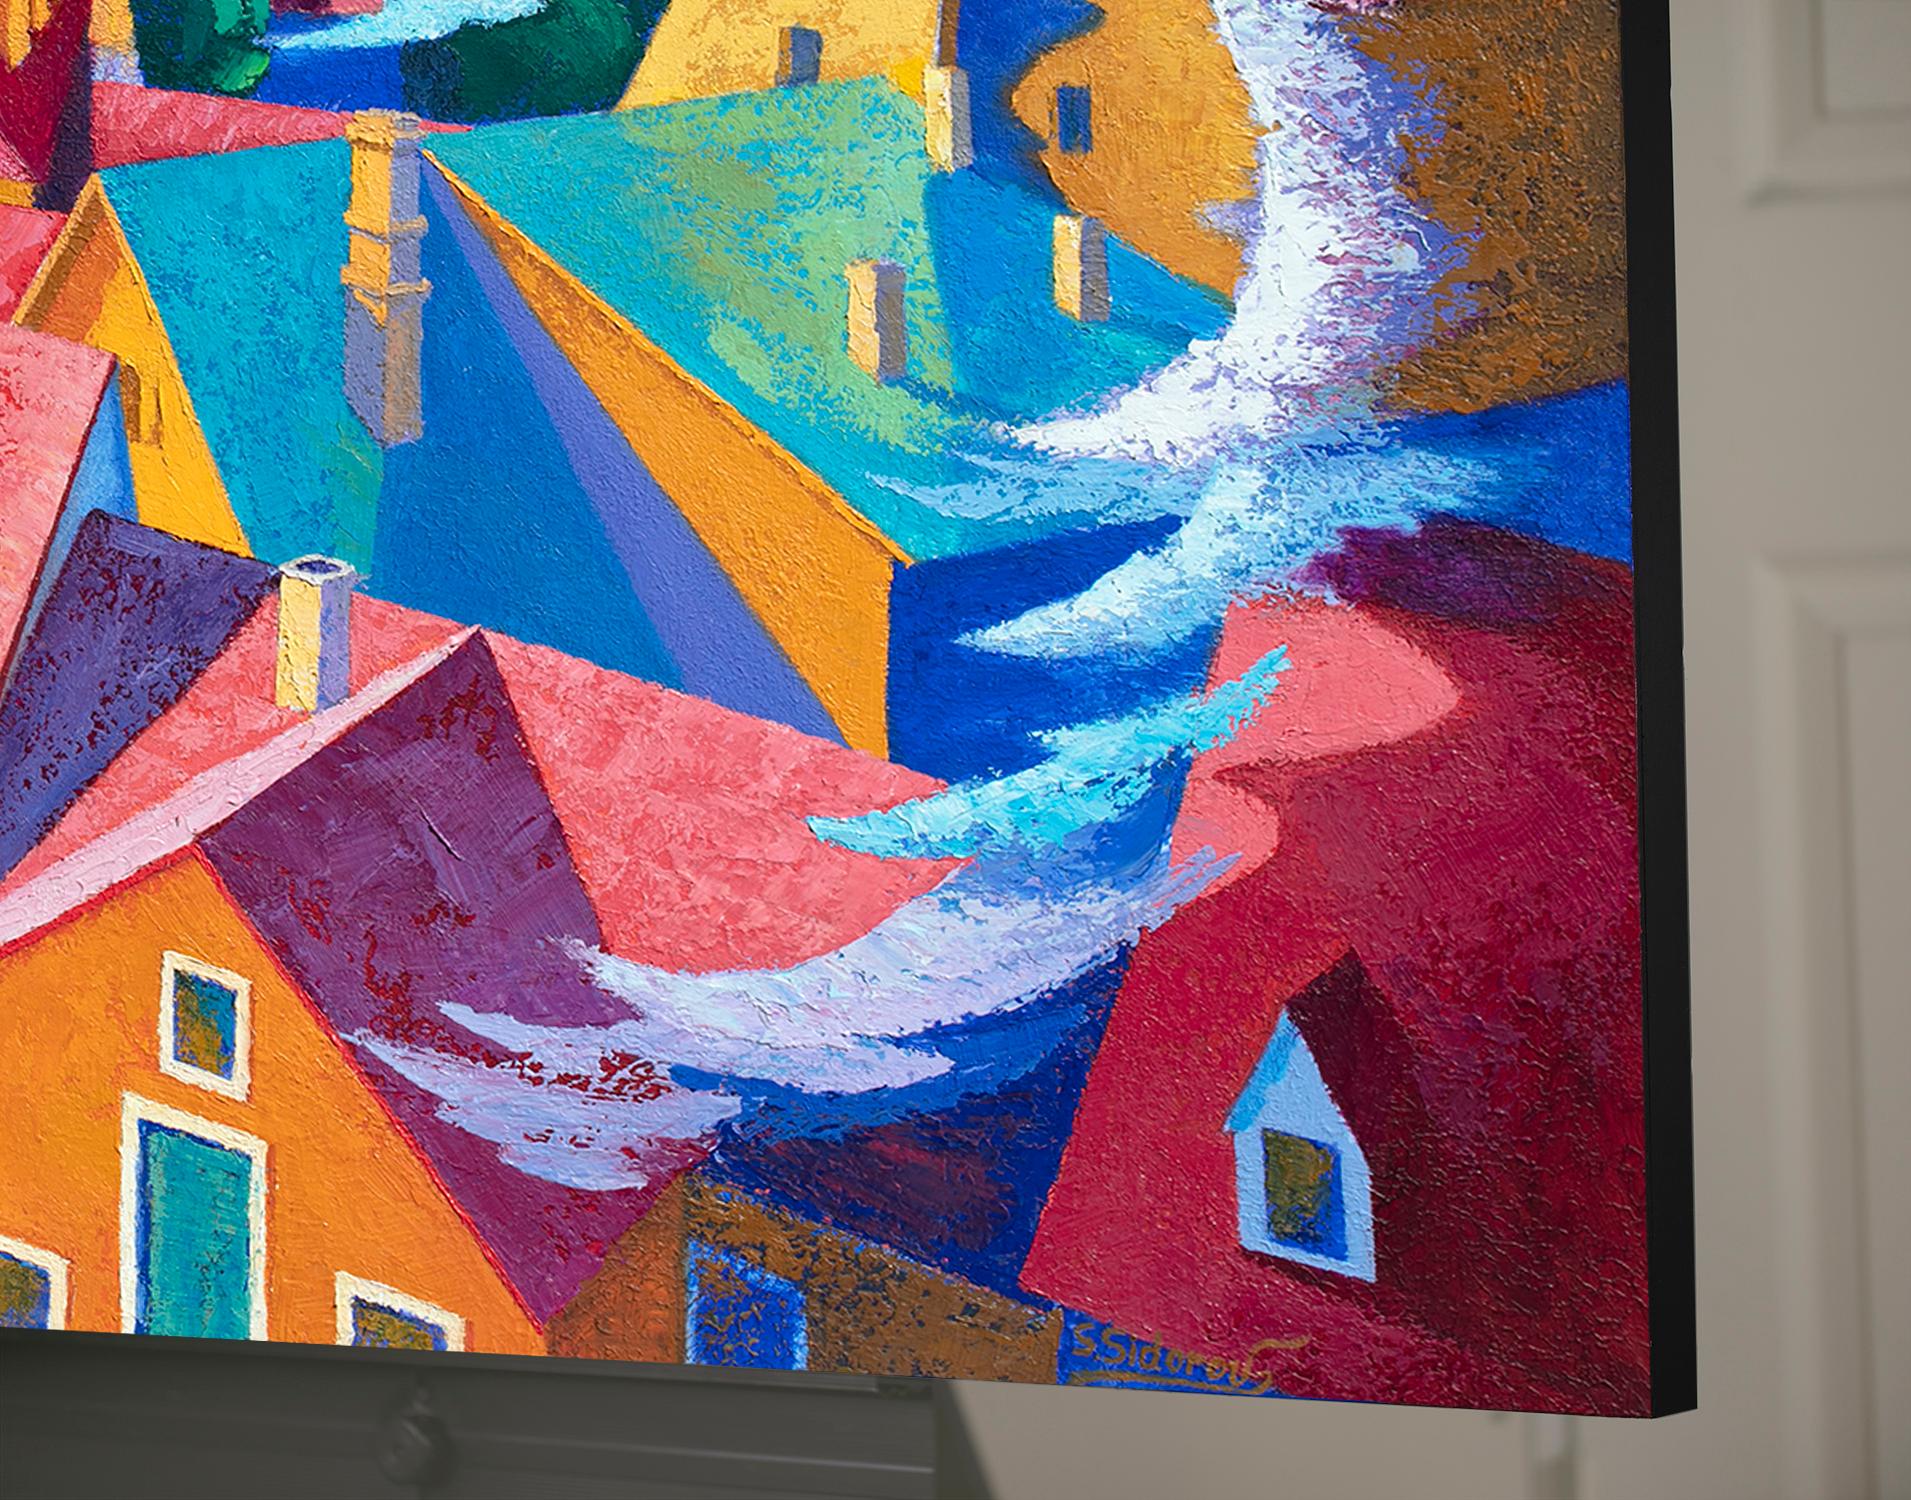 <p>Artist Comments<br>Artist Stanislav Sidorov presents an expressionist overhead view of Meissen Germany as part of his Cityscape series. The scene boasts old European architecture and stands beautifully in vibrant colors. Blue gusts of wind blow